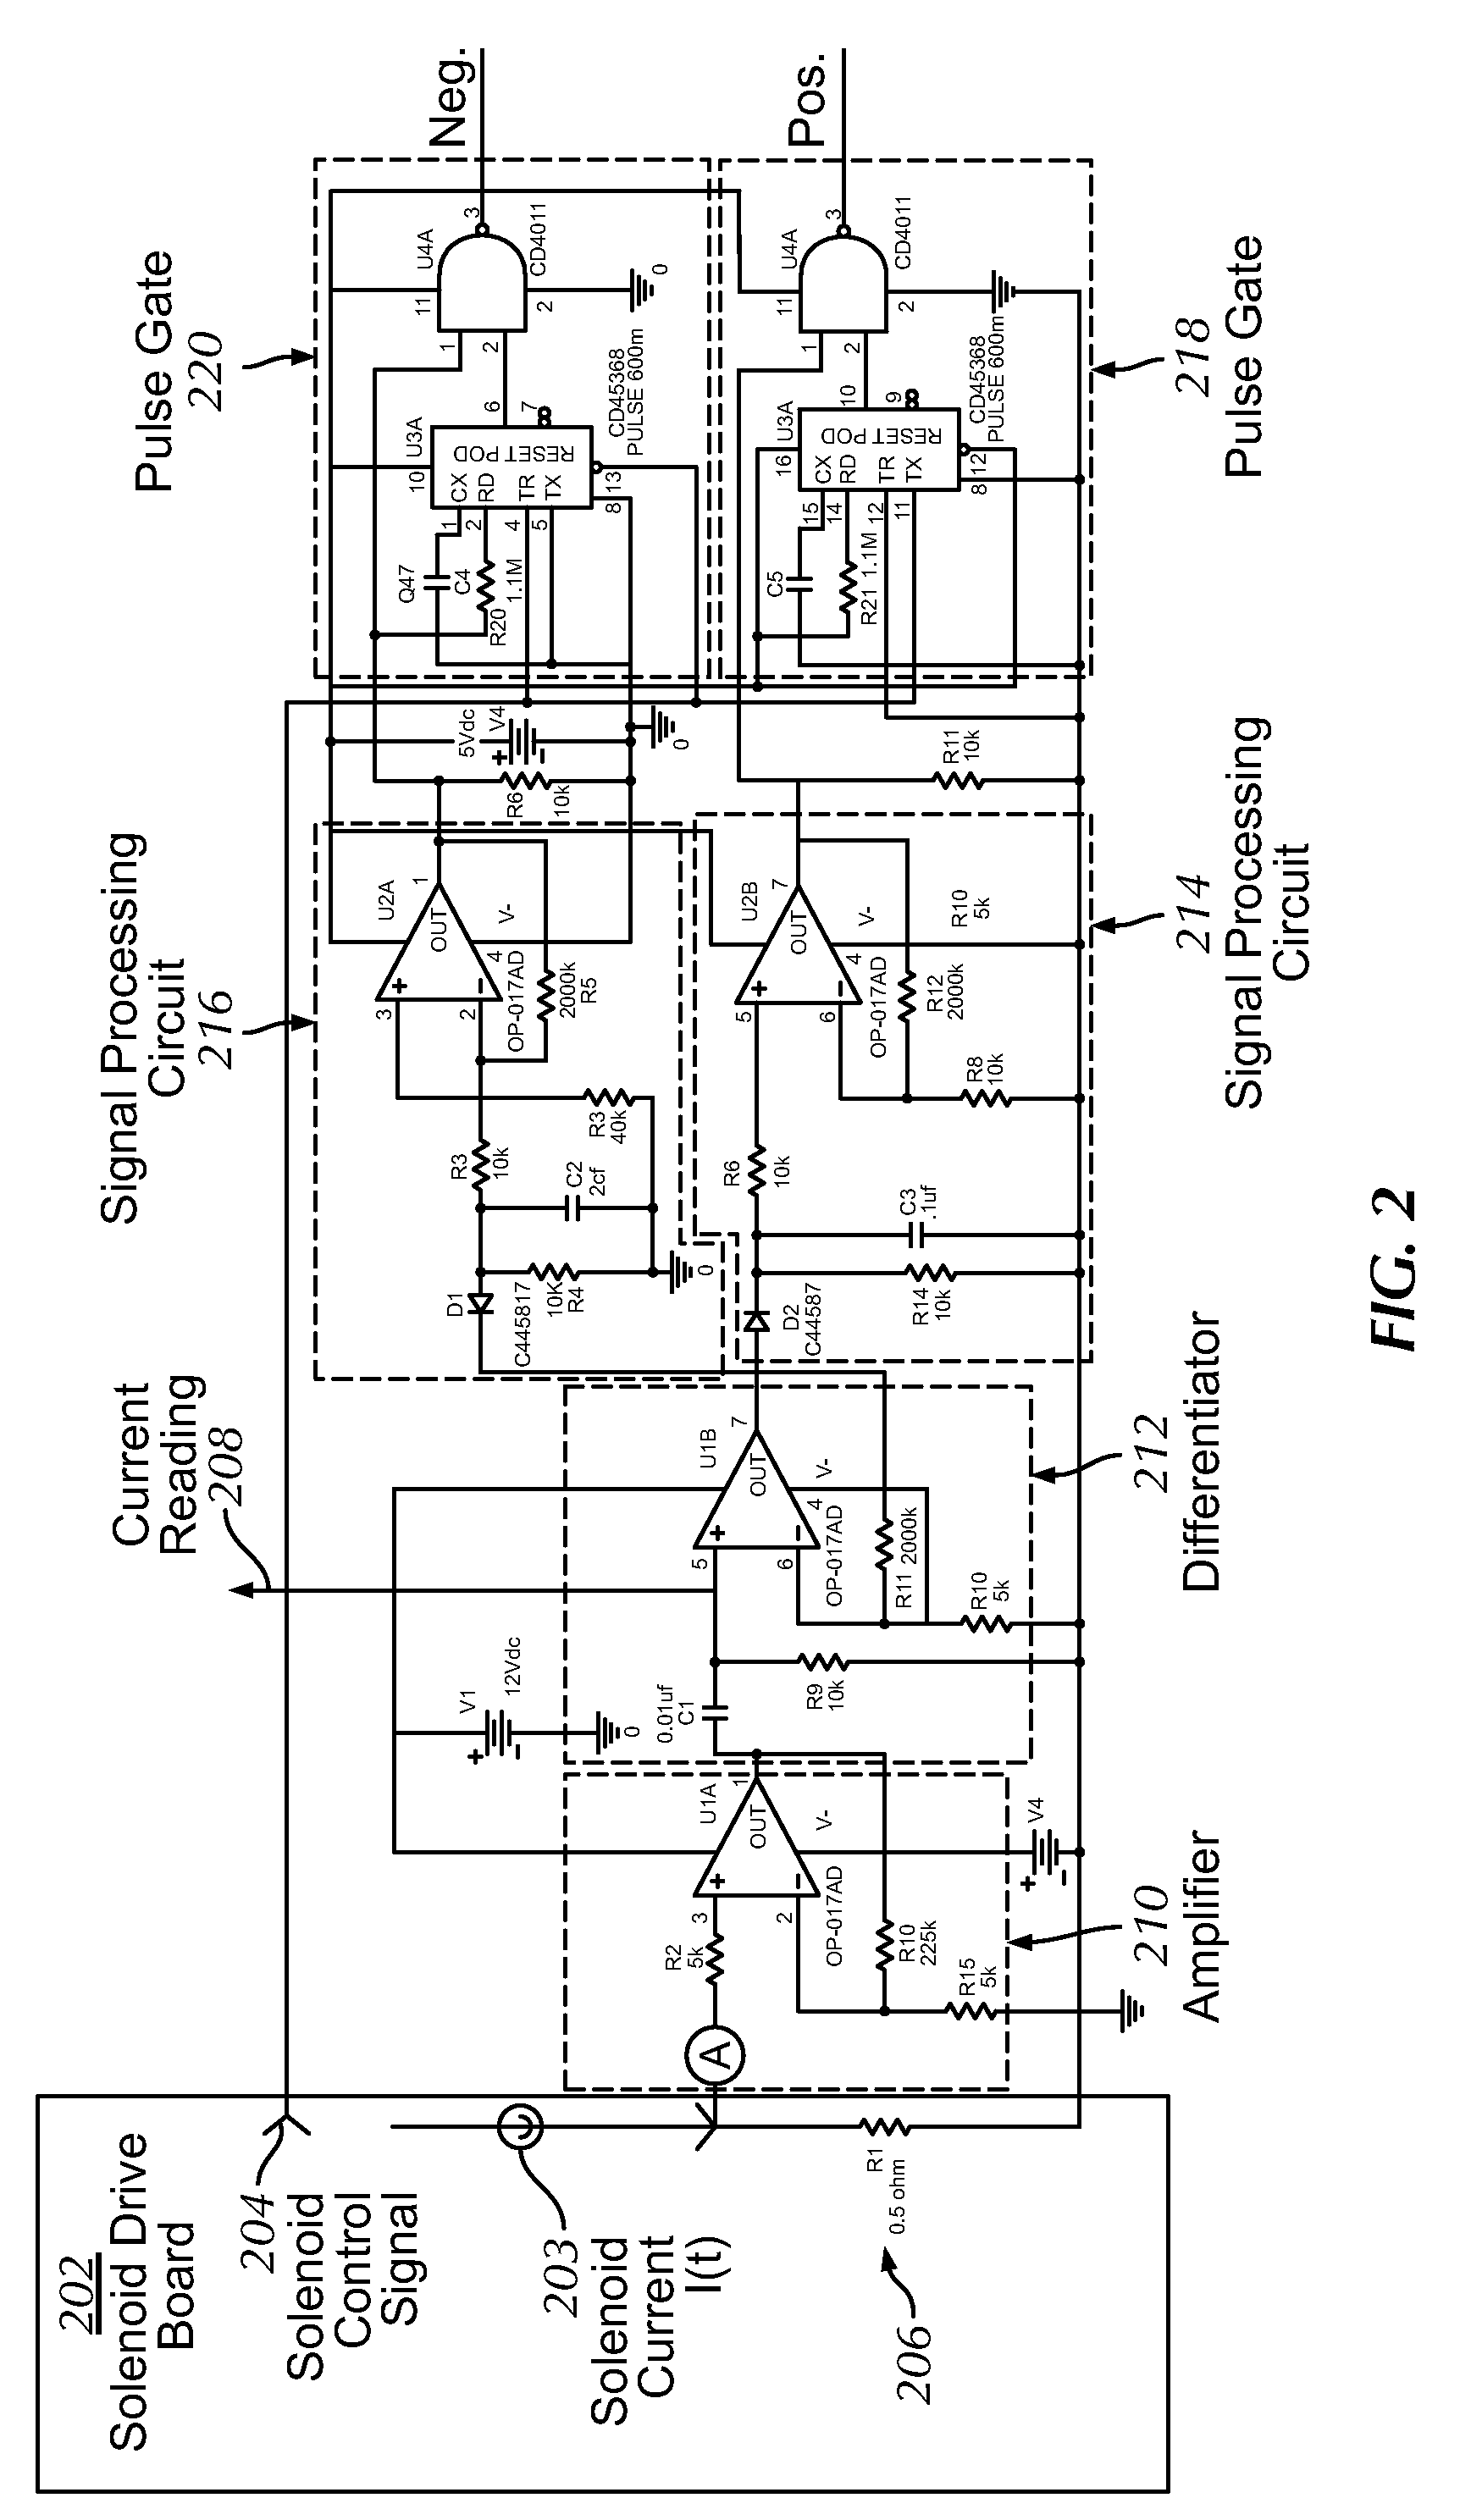 Movement detection circuit of solenoid shear seal valve on subsea pressure control system and method of detecting movement of solenoid actuator